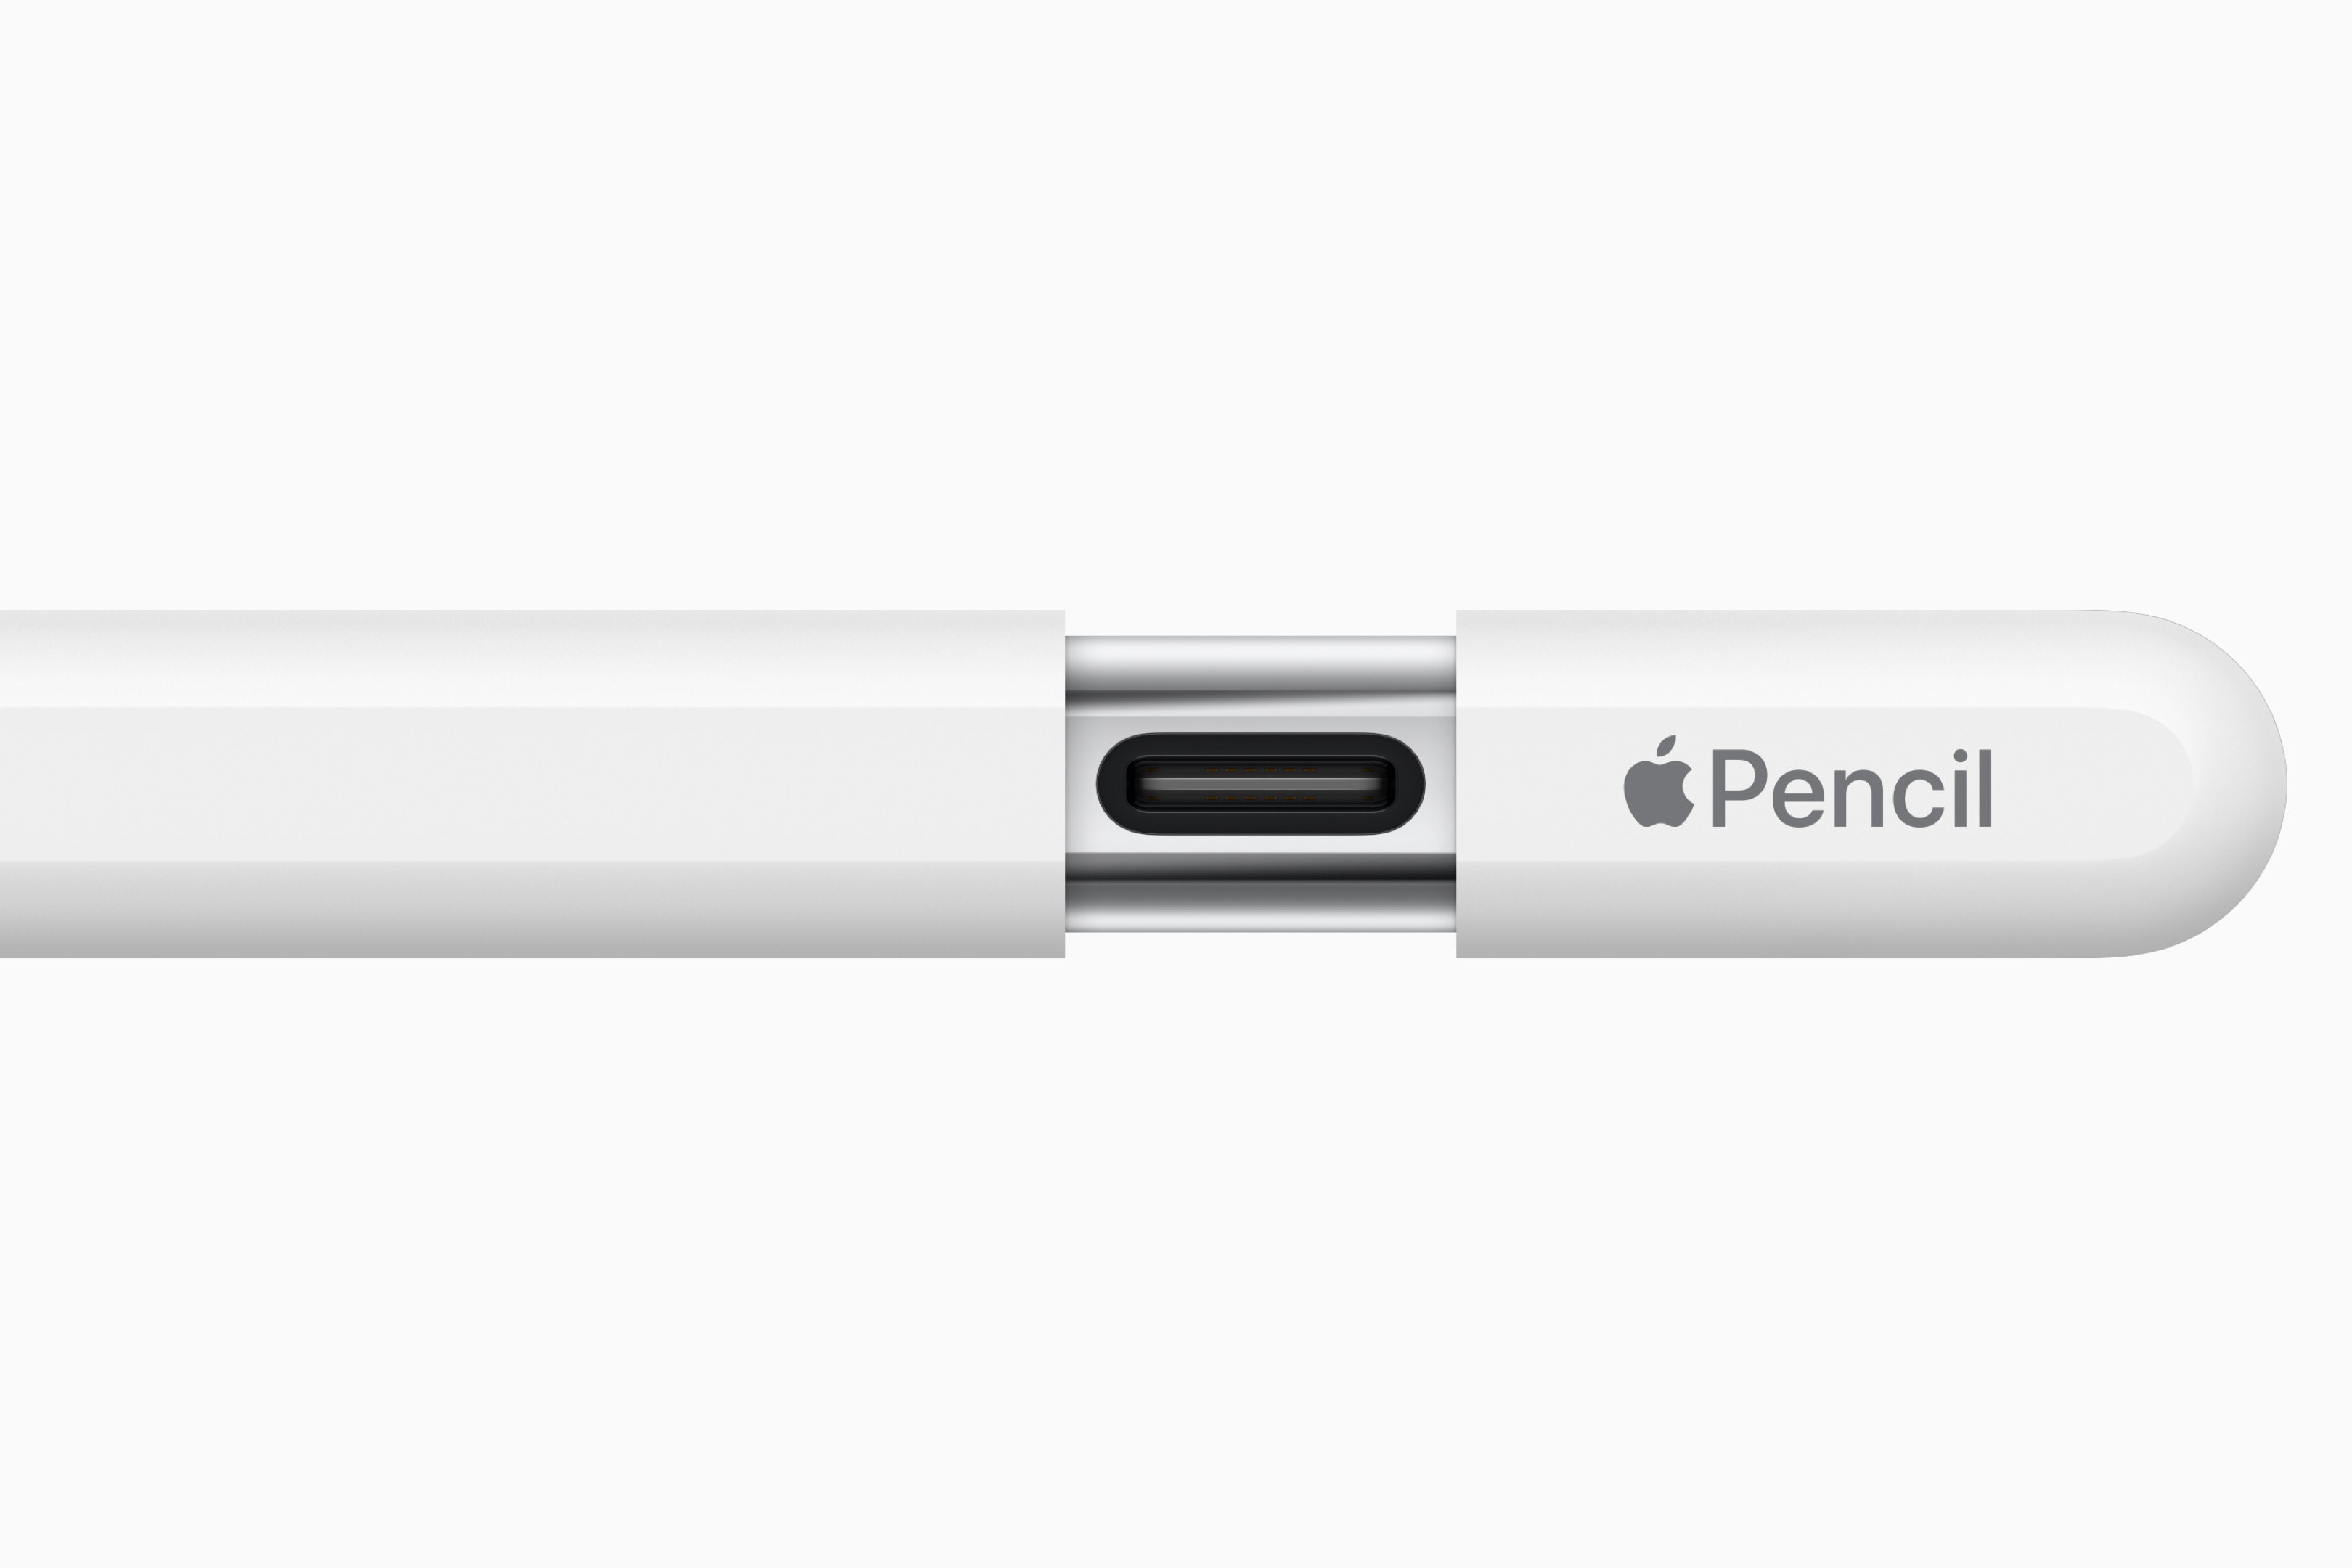 The USB-C Apple Pencil fixes an iPad problem I've had for years